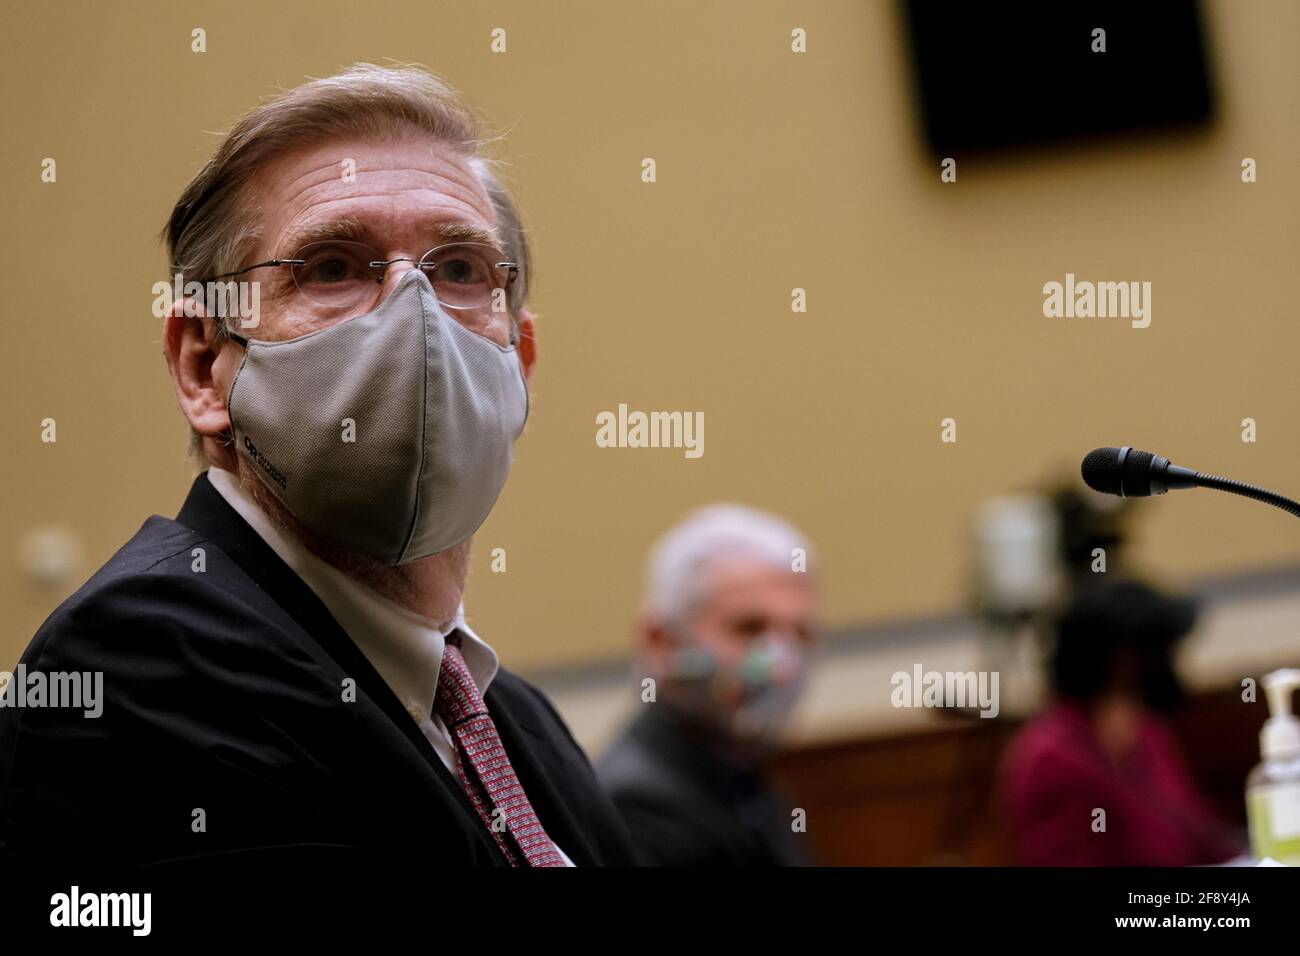 Washington, United States. 15th Apr, 2021. Chief Science Officer for COVID Response Dr. David Kessler speaks during a hearing of the House Select Subcommittee on the Coronavirus Crisis at the U.S. Capitol in Washington DC, on Thursday, April 15, 2021. Pool photo by Amr Alfiky/UPI Credit: UPI/Alamy Live News Stock Photo